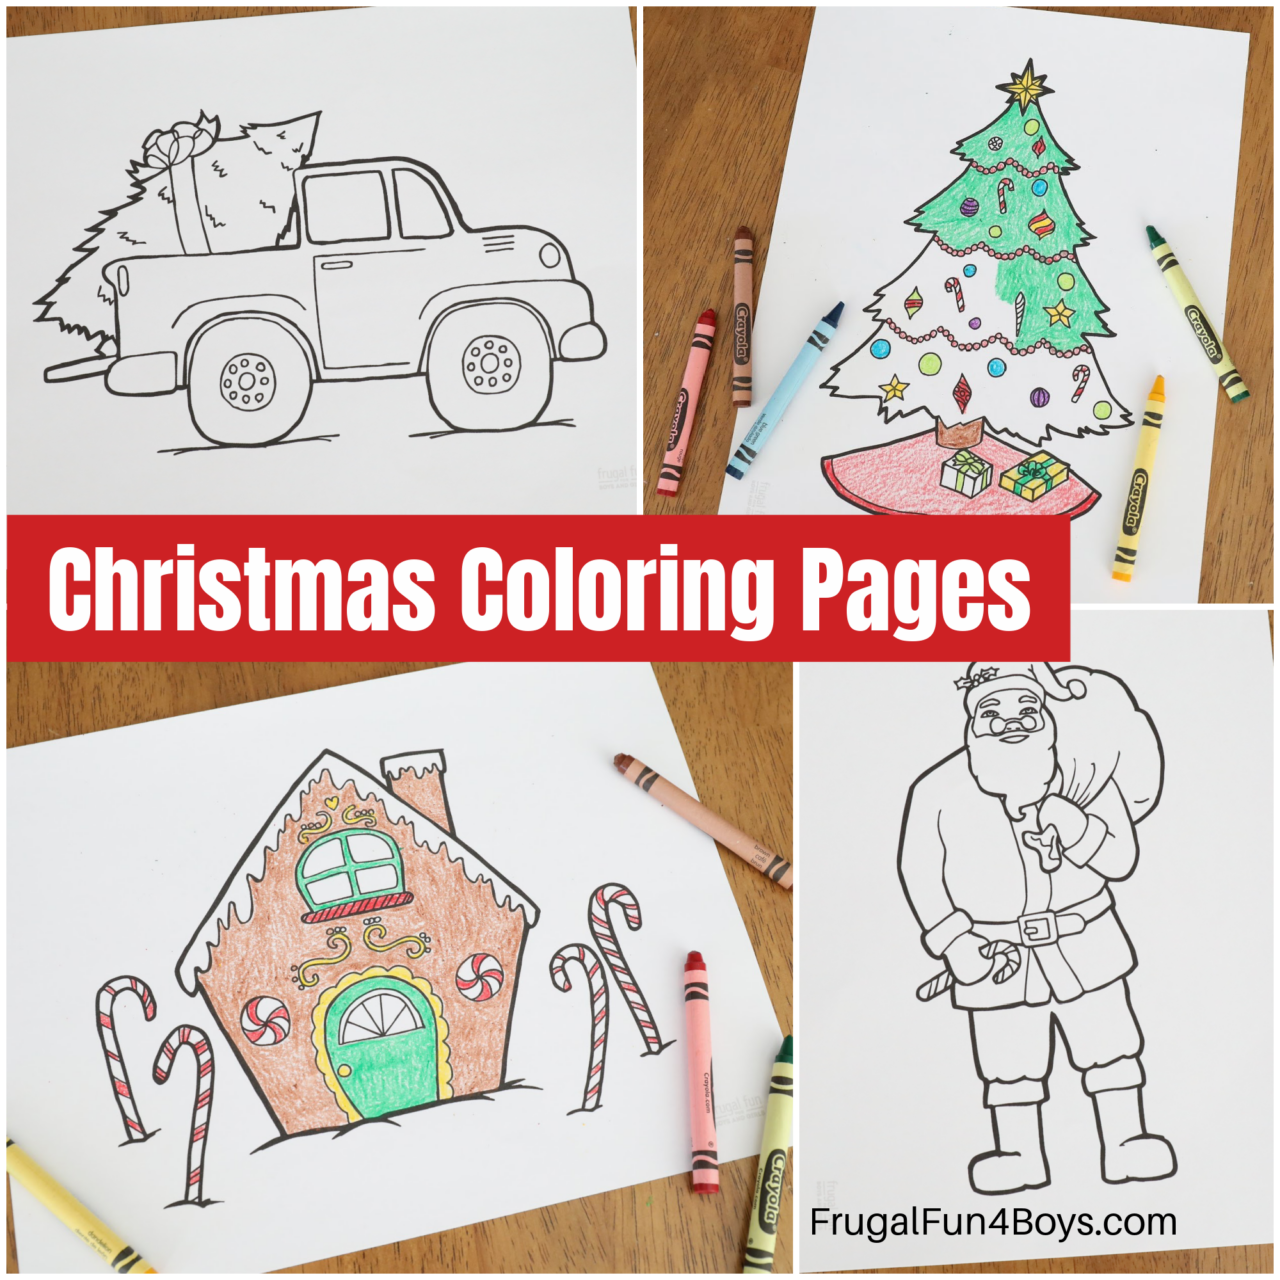 Printable Christmas Coloring Pages   Frugal Fun For Boys and Girls